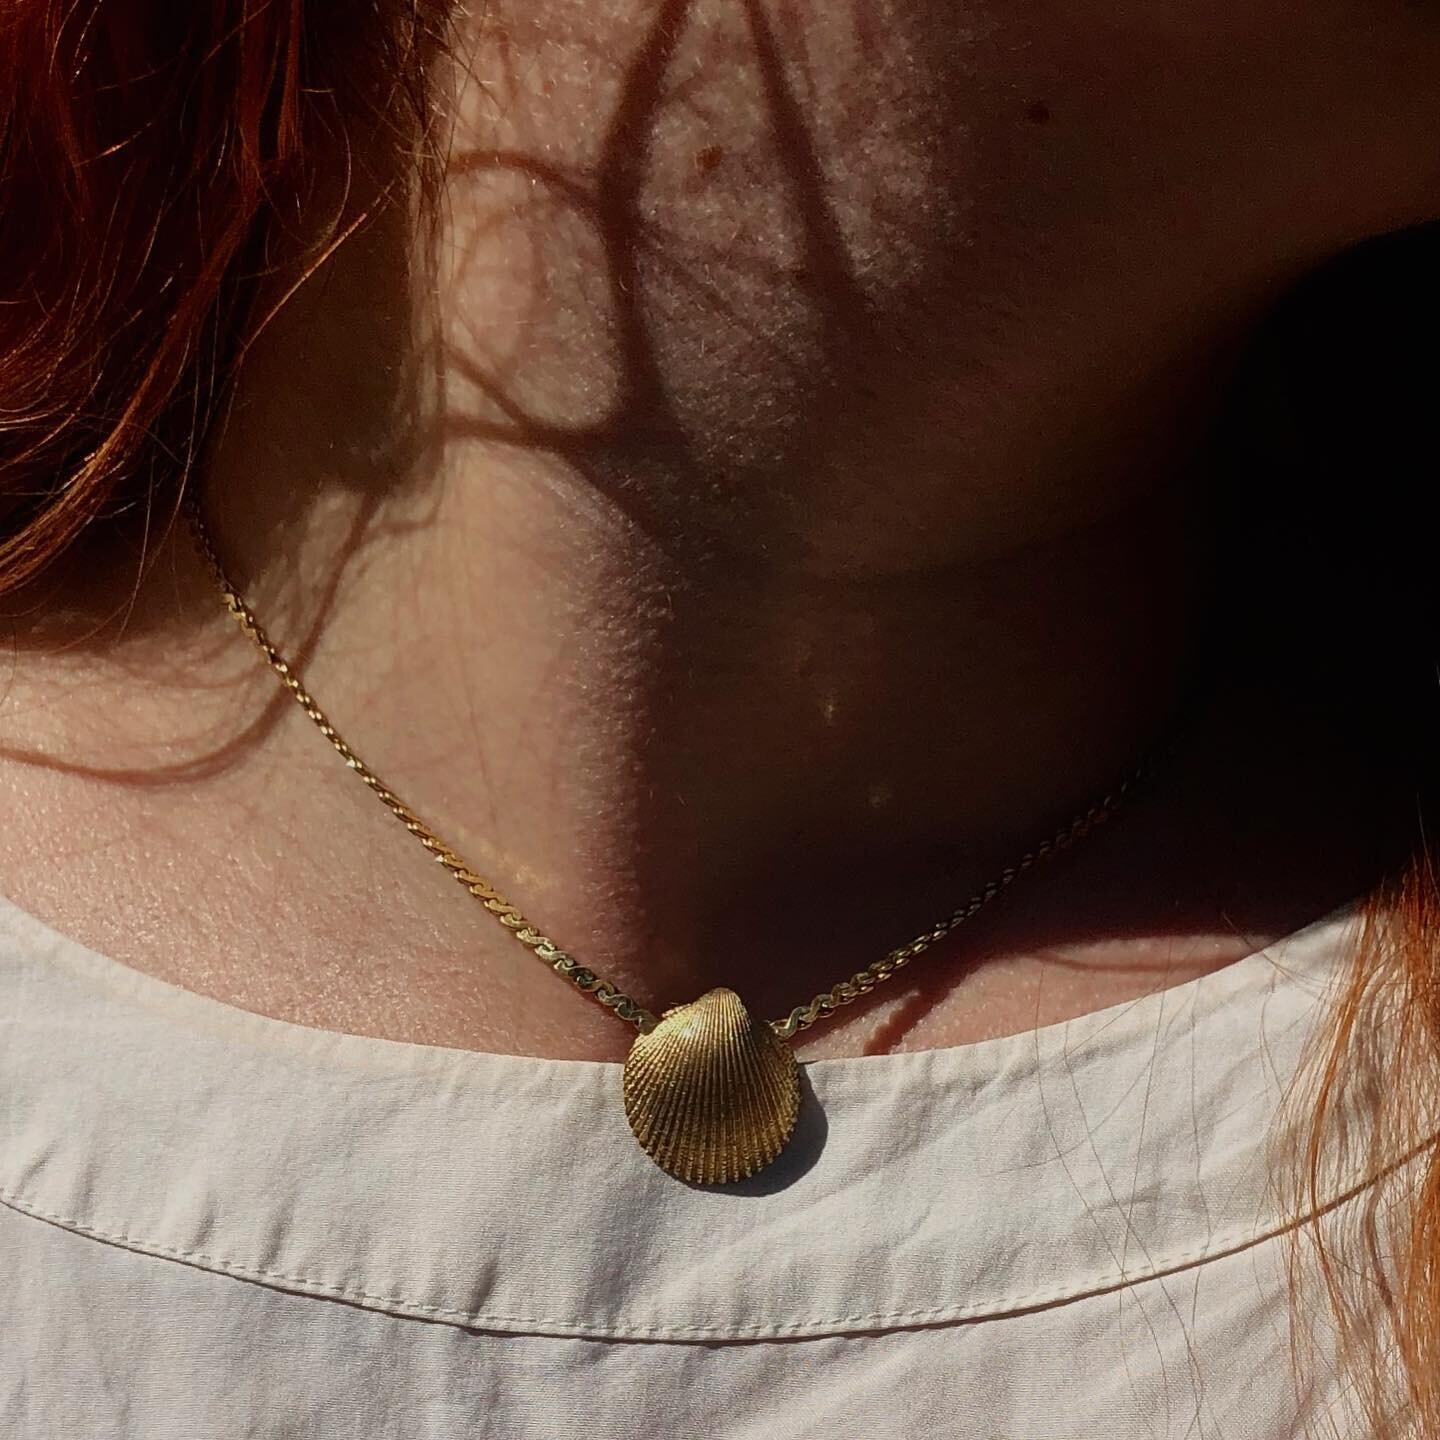 our golden shell 
from collection 01
in the wild via @sianna.flowers 🐚